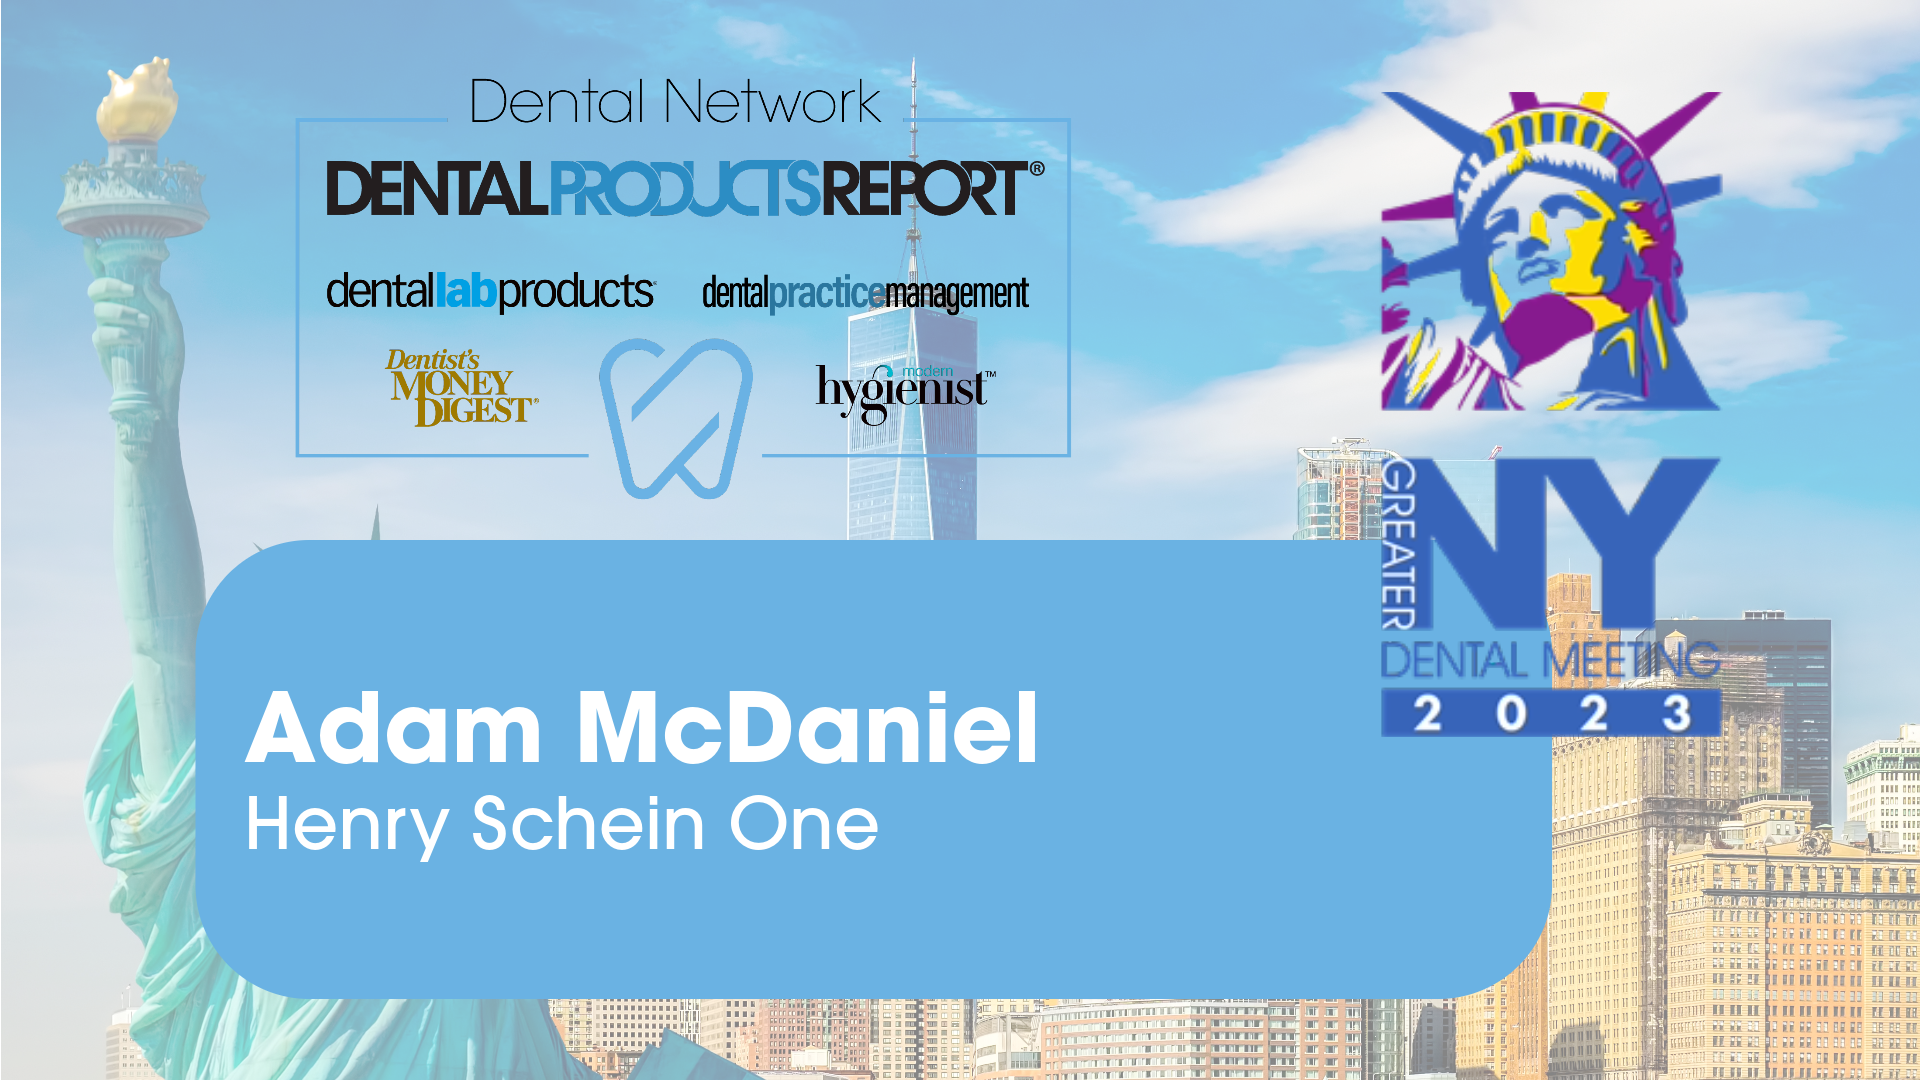 Greater New York Dental Meeting 2023 – Interview with Adam McDaniel from Henry Schein One